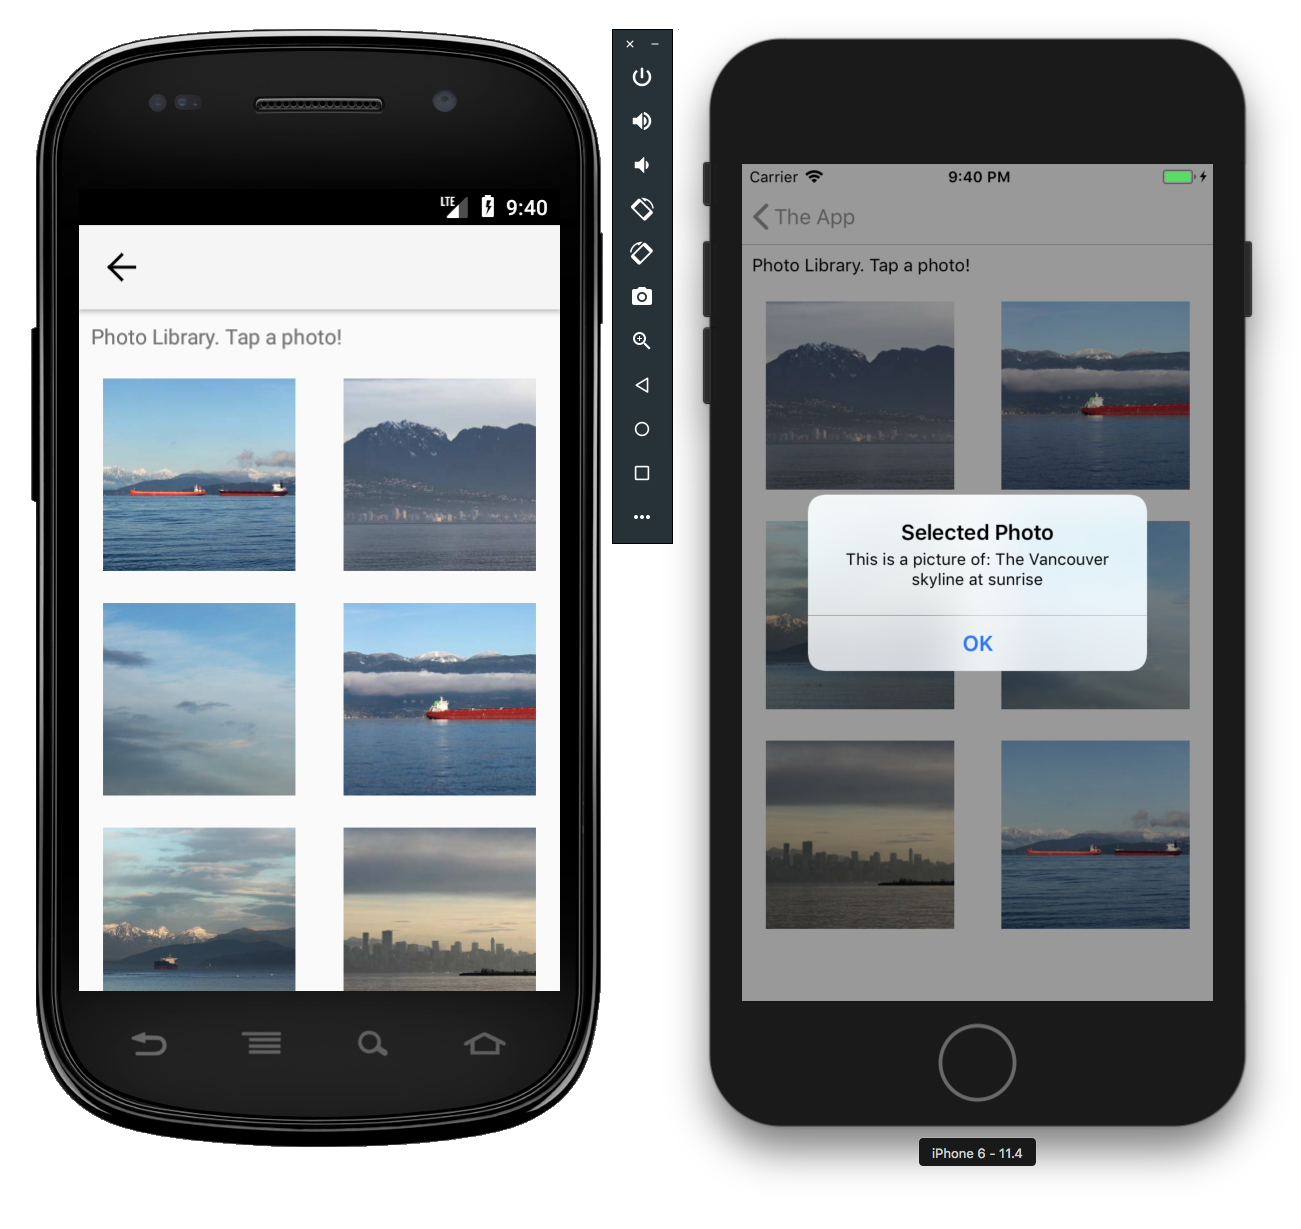 The photo view feature